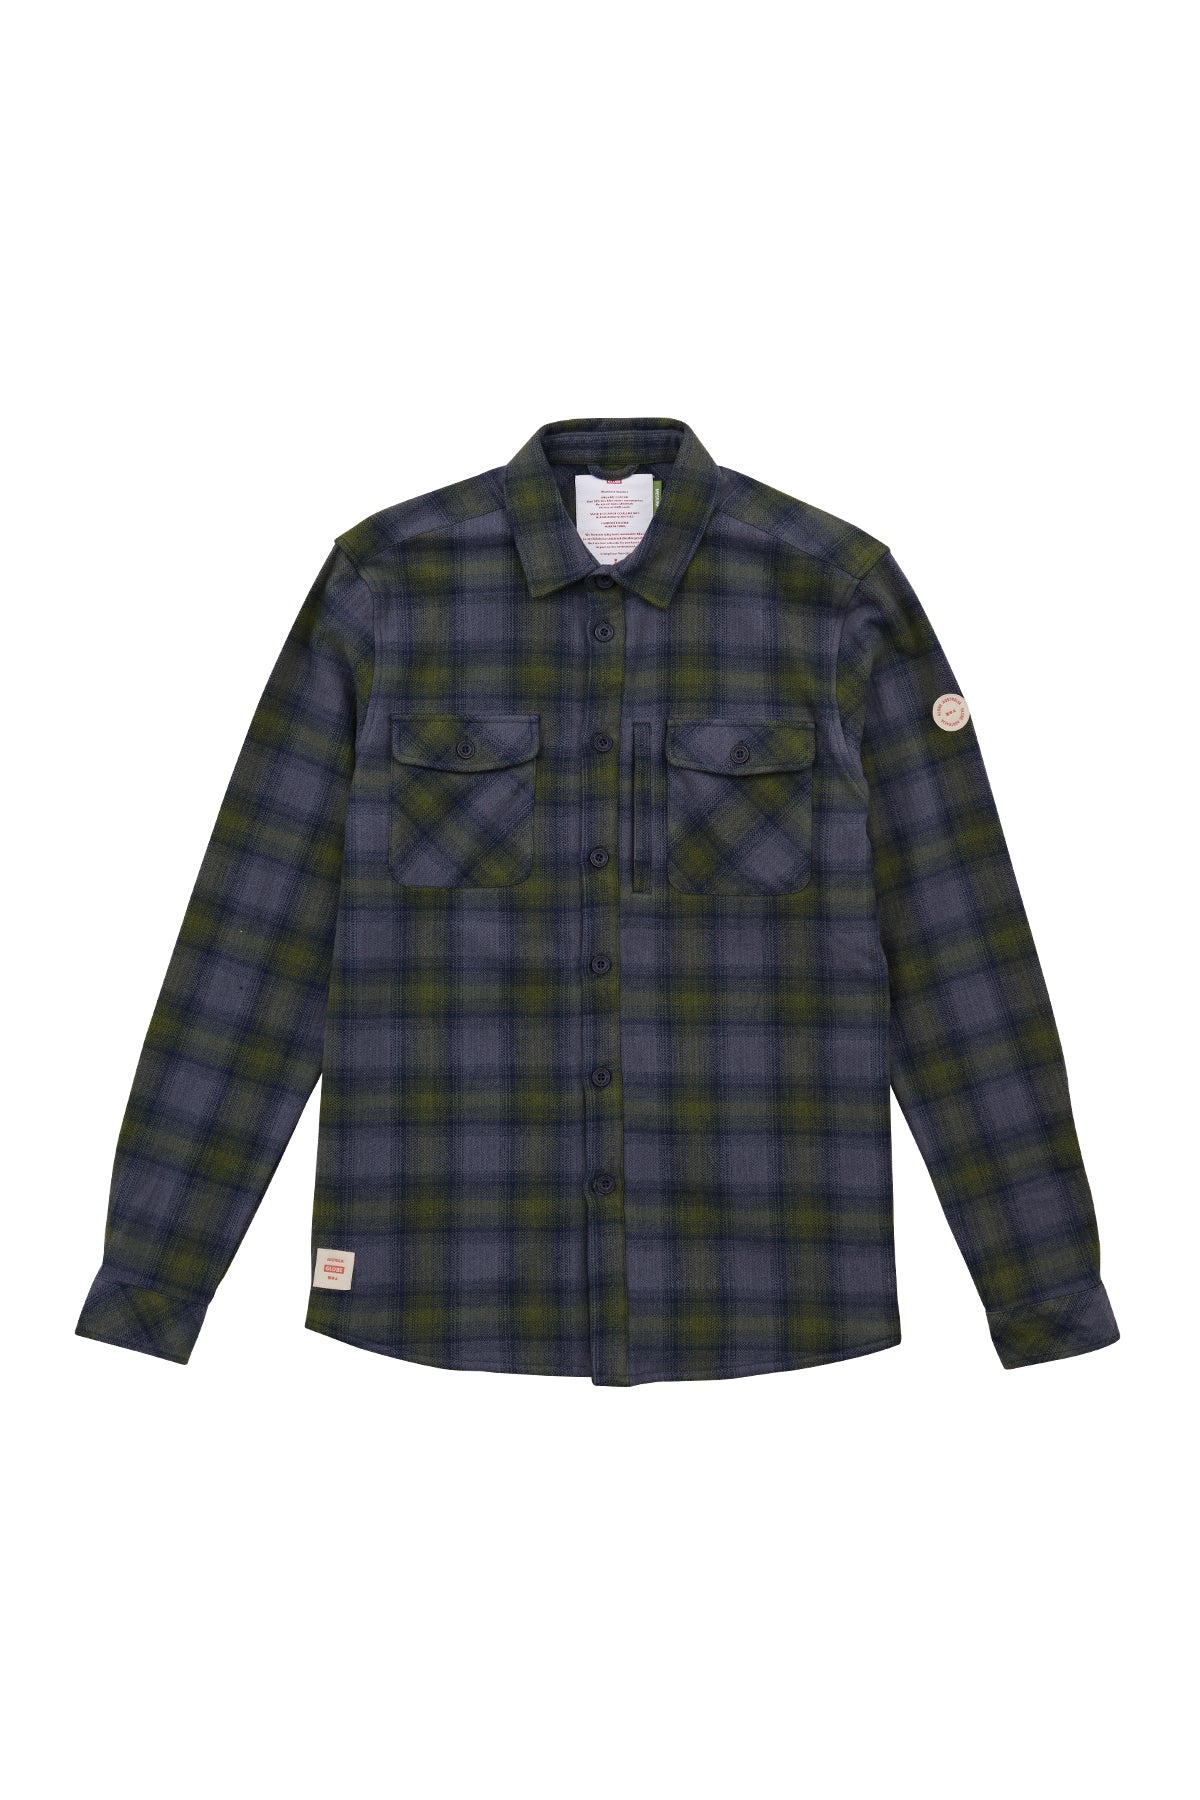 front facing Navy Globe button up jacket